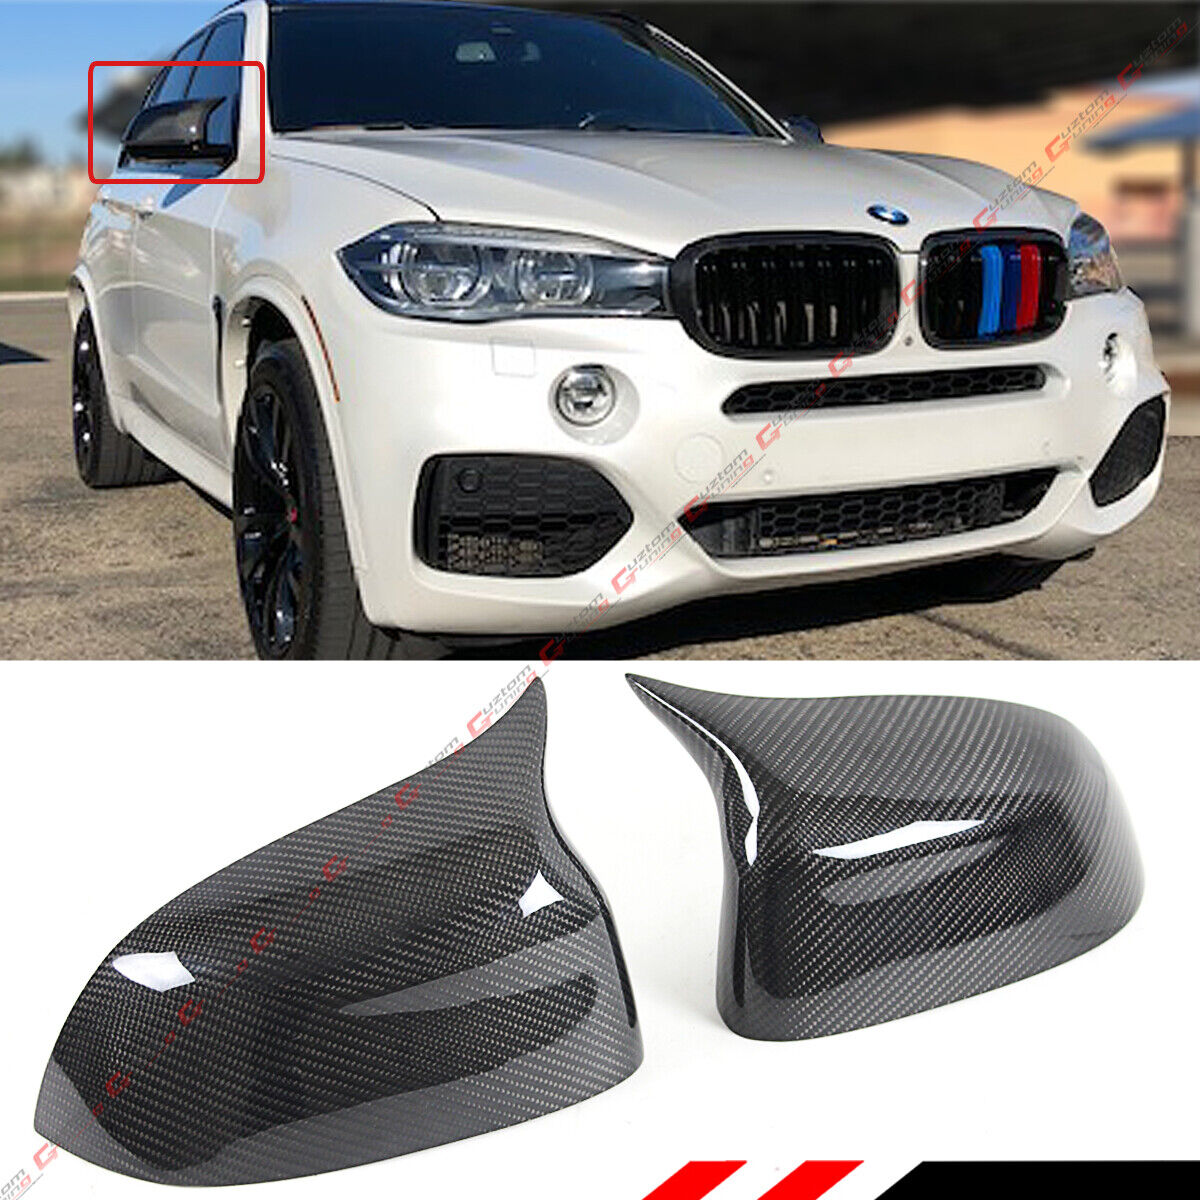 FOR 2015-2018 BMW X5 X6 CARBON FIBER SIDE MIRROR COVER CAPS REPLACEMENT- M STYLE